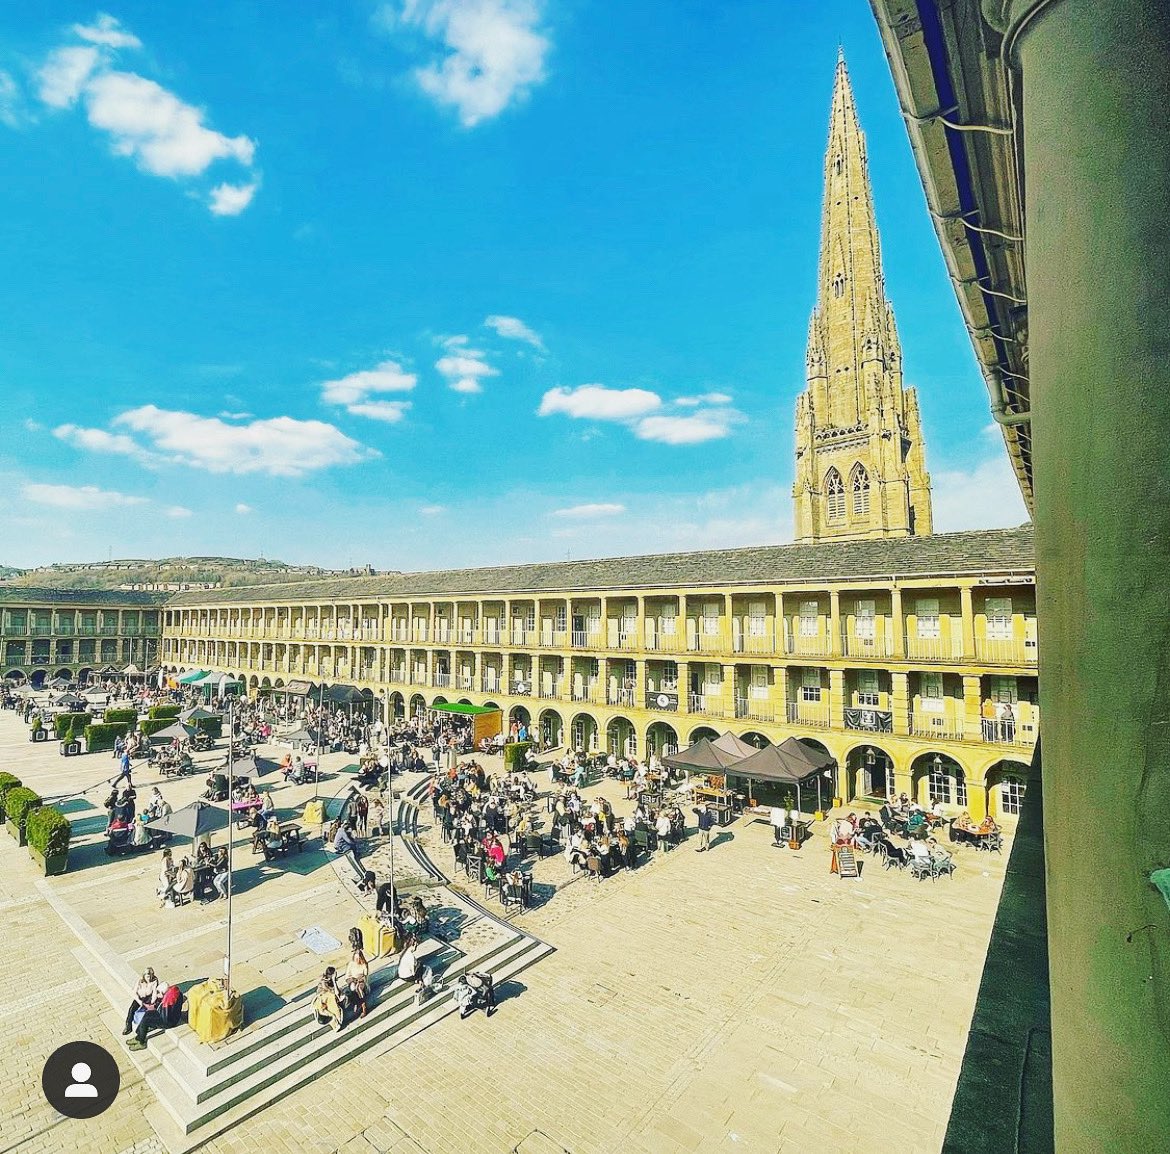 💥 Records, coffee, beer, wine & cake here in this beautiful building @ThePieceHall 💥 The greatest sun terrace in the UK ☀️ 🔝🎶🍪☕️✌️🍷🍺🙏